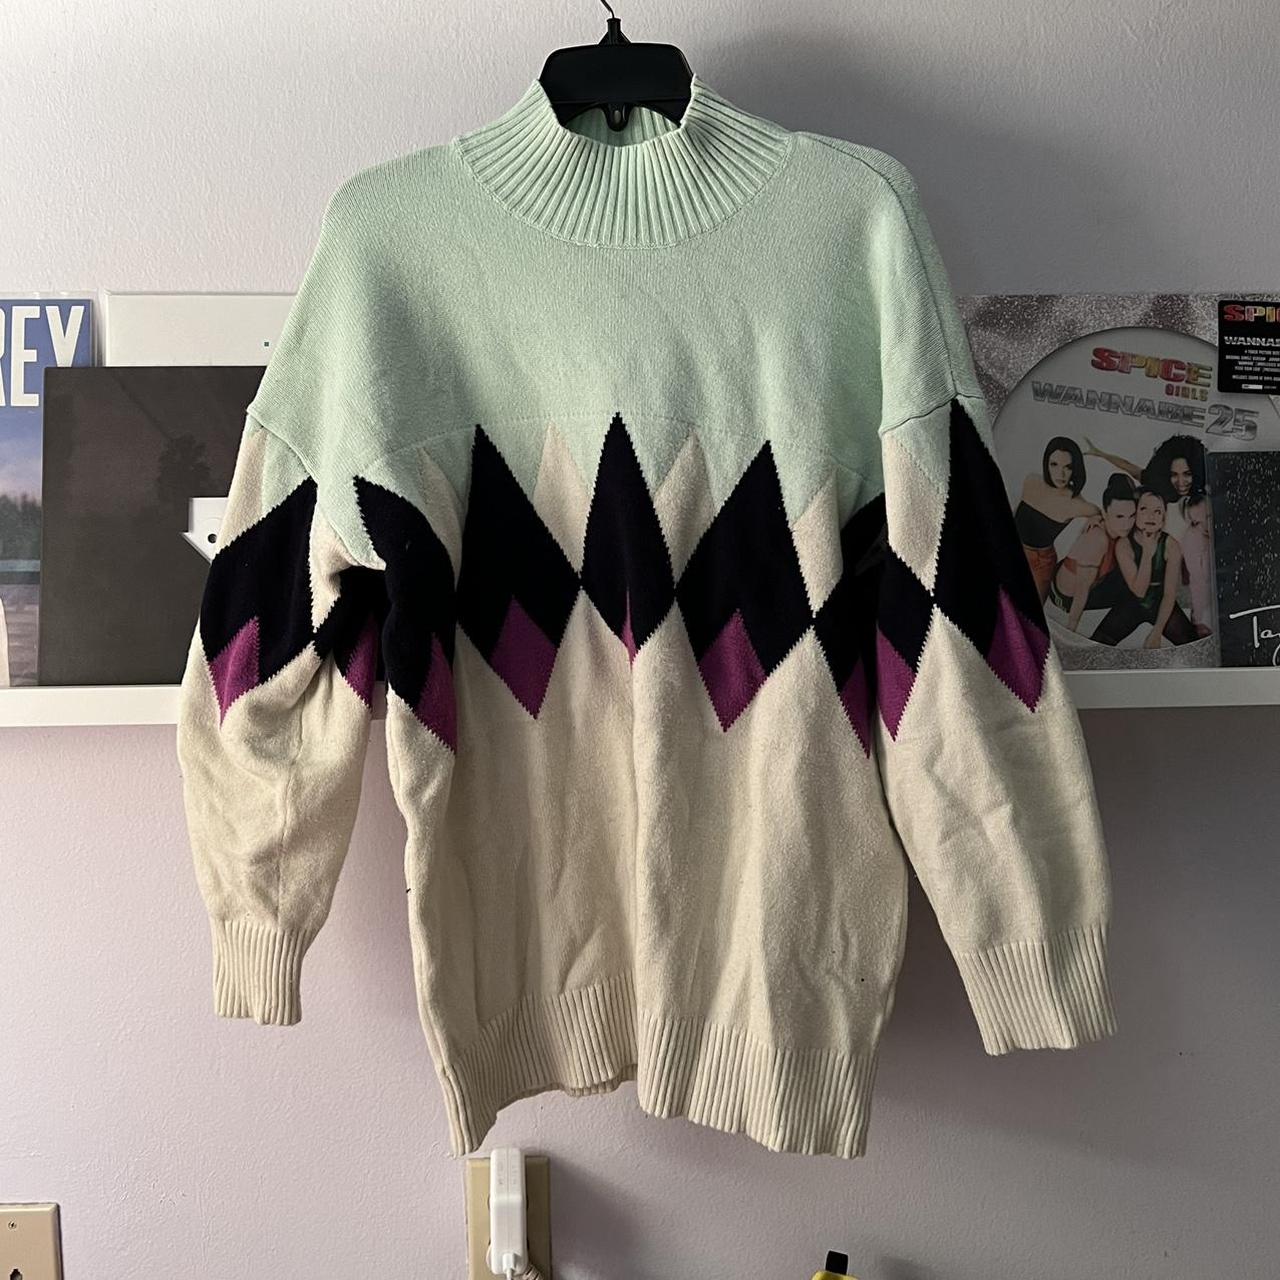 Julia_ii on X: Aesthetic mint sweater! Only 5 Robux! ♡